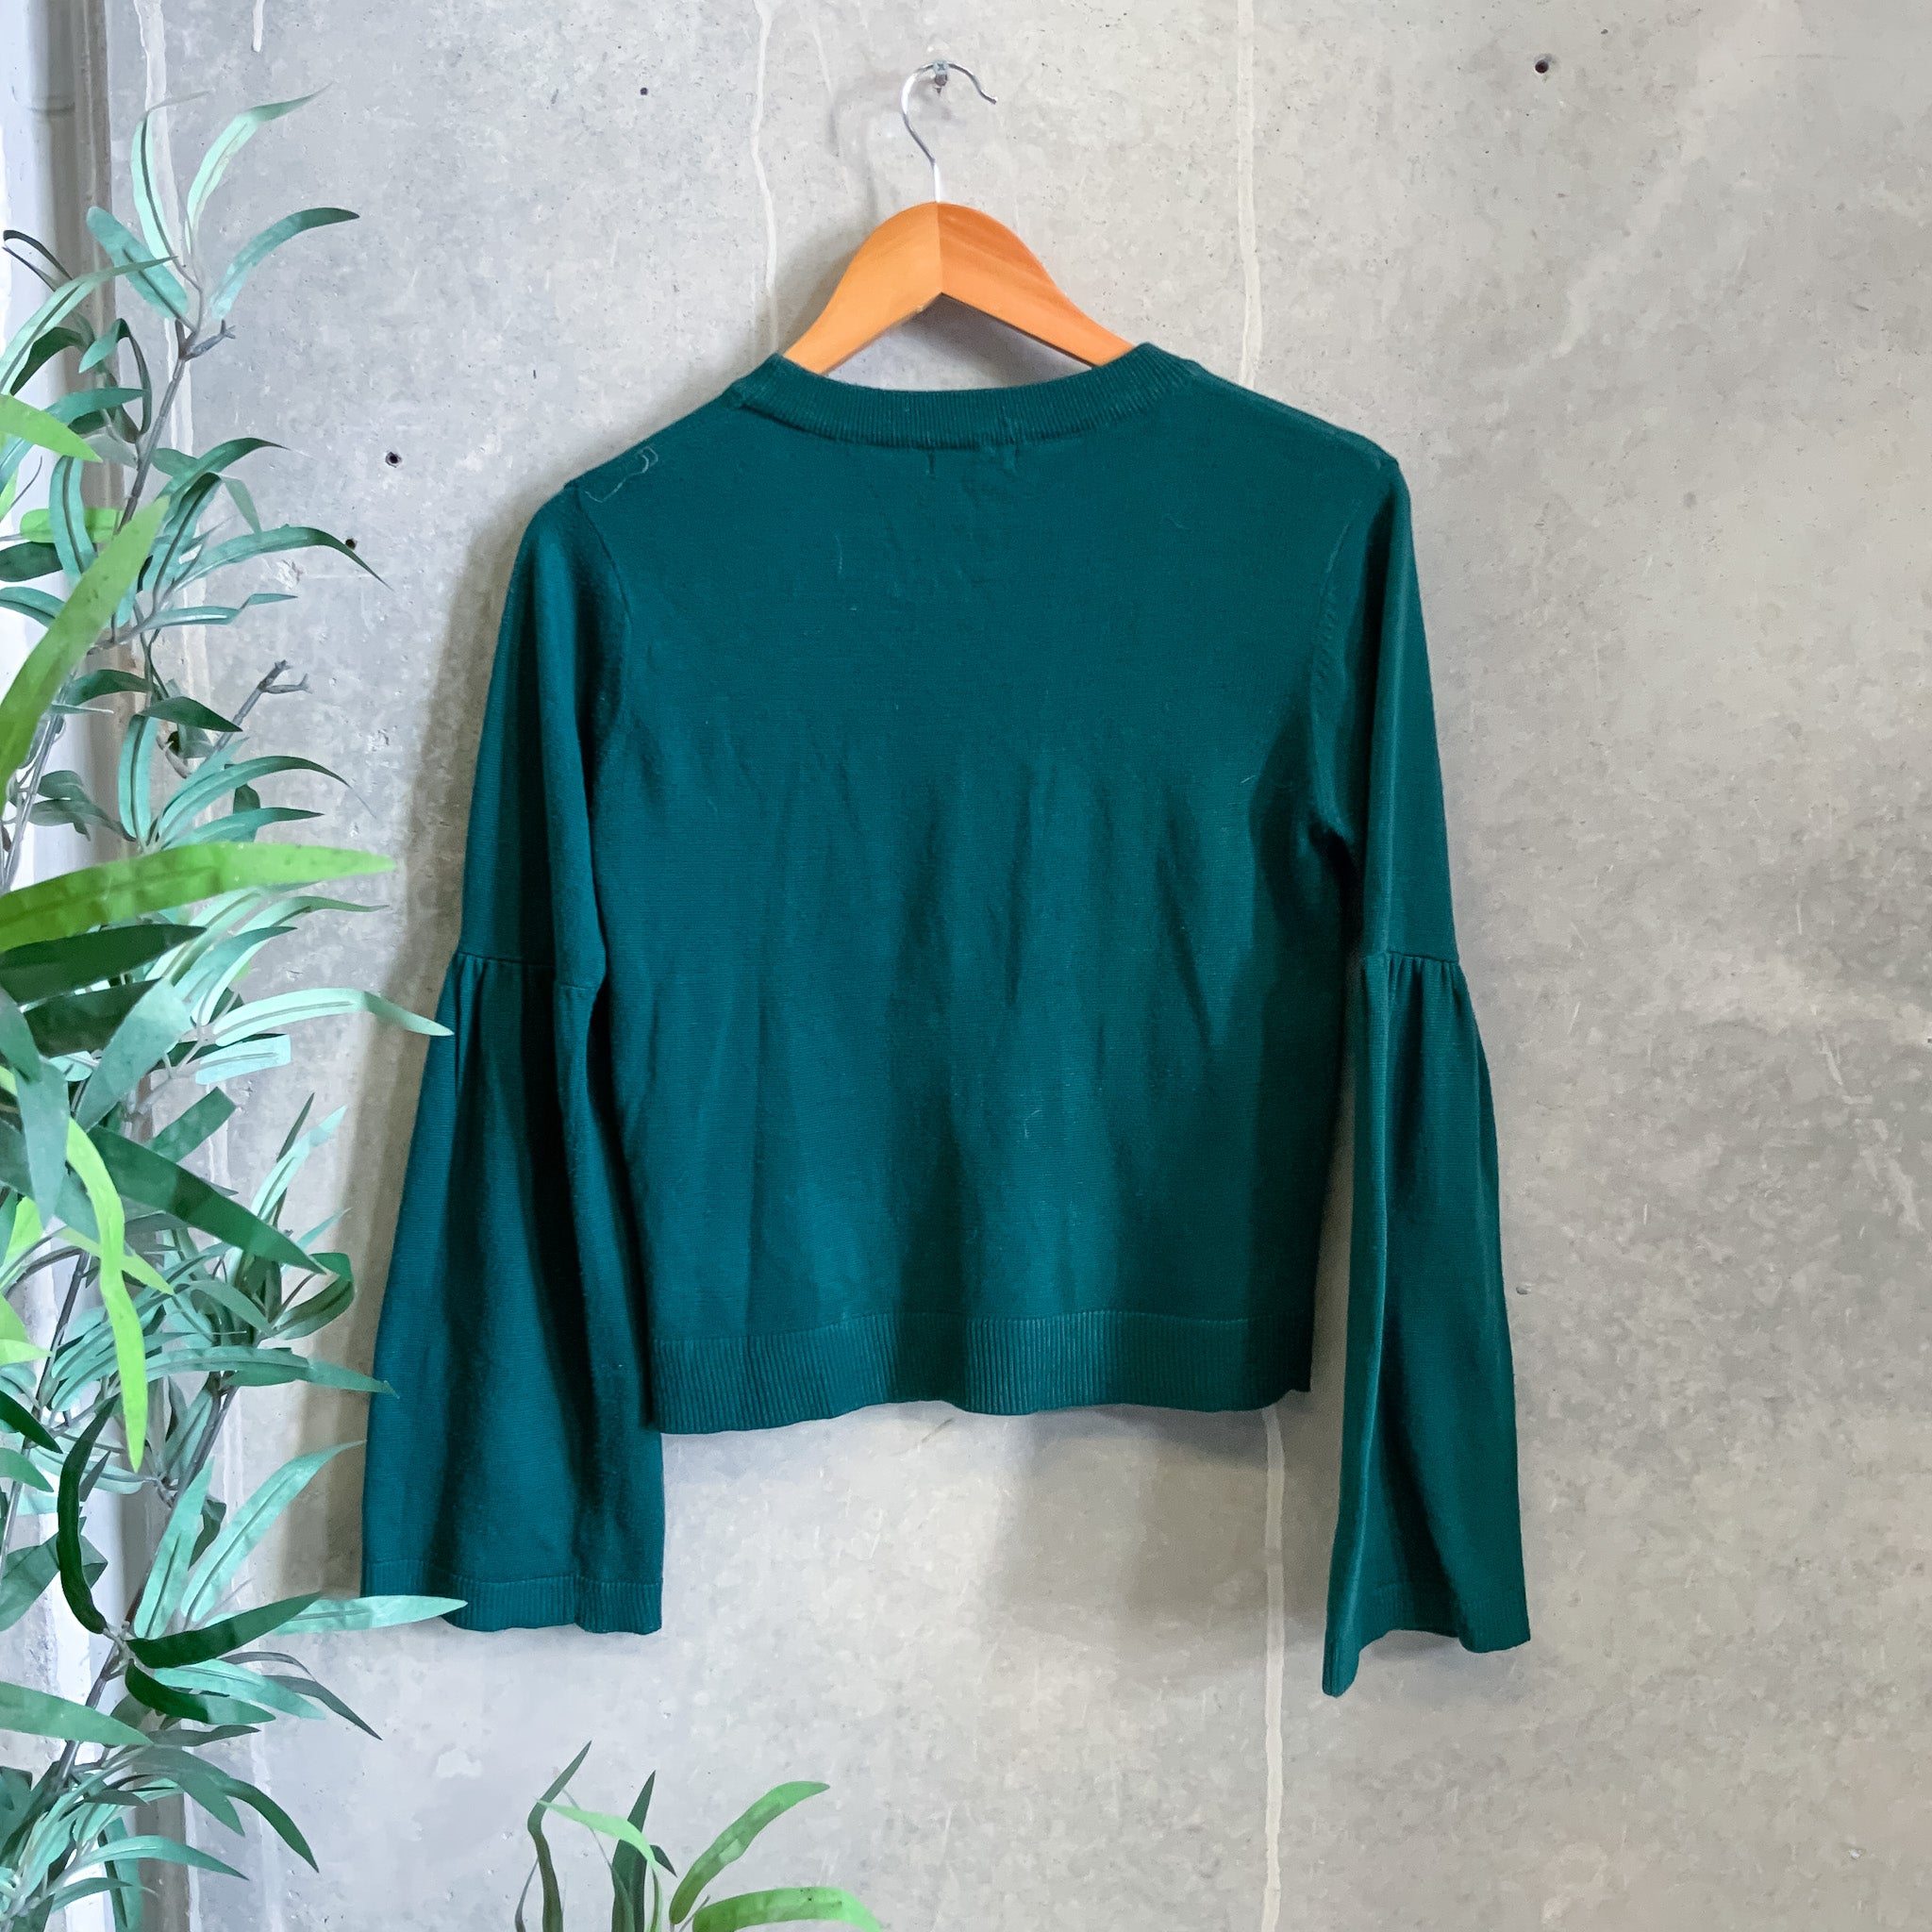 MISS VALLEY Bell Sleeved Green Crew Neck Knit Sweater/Top - Size S